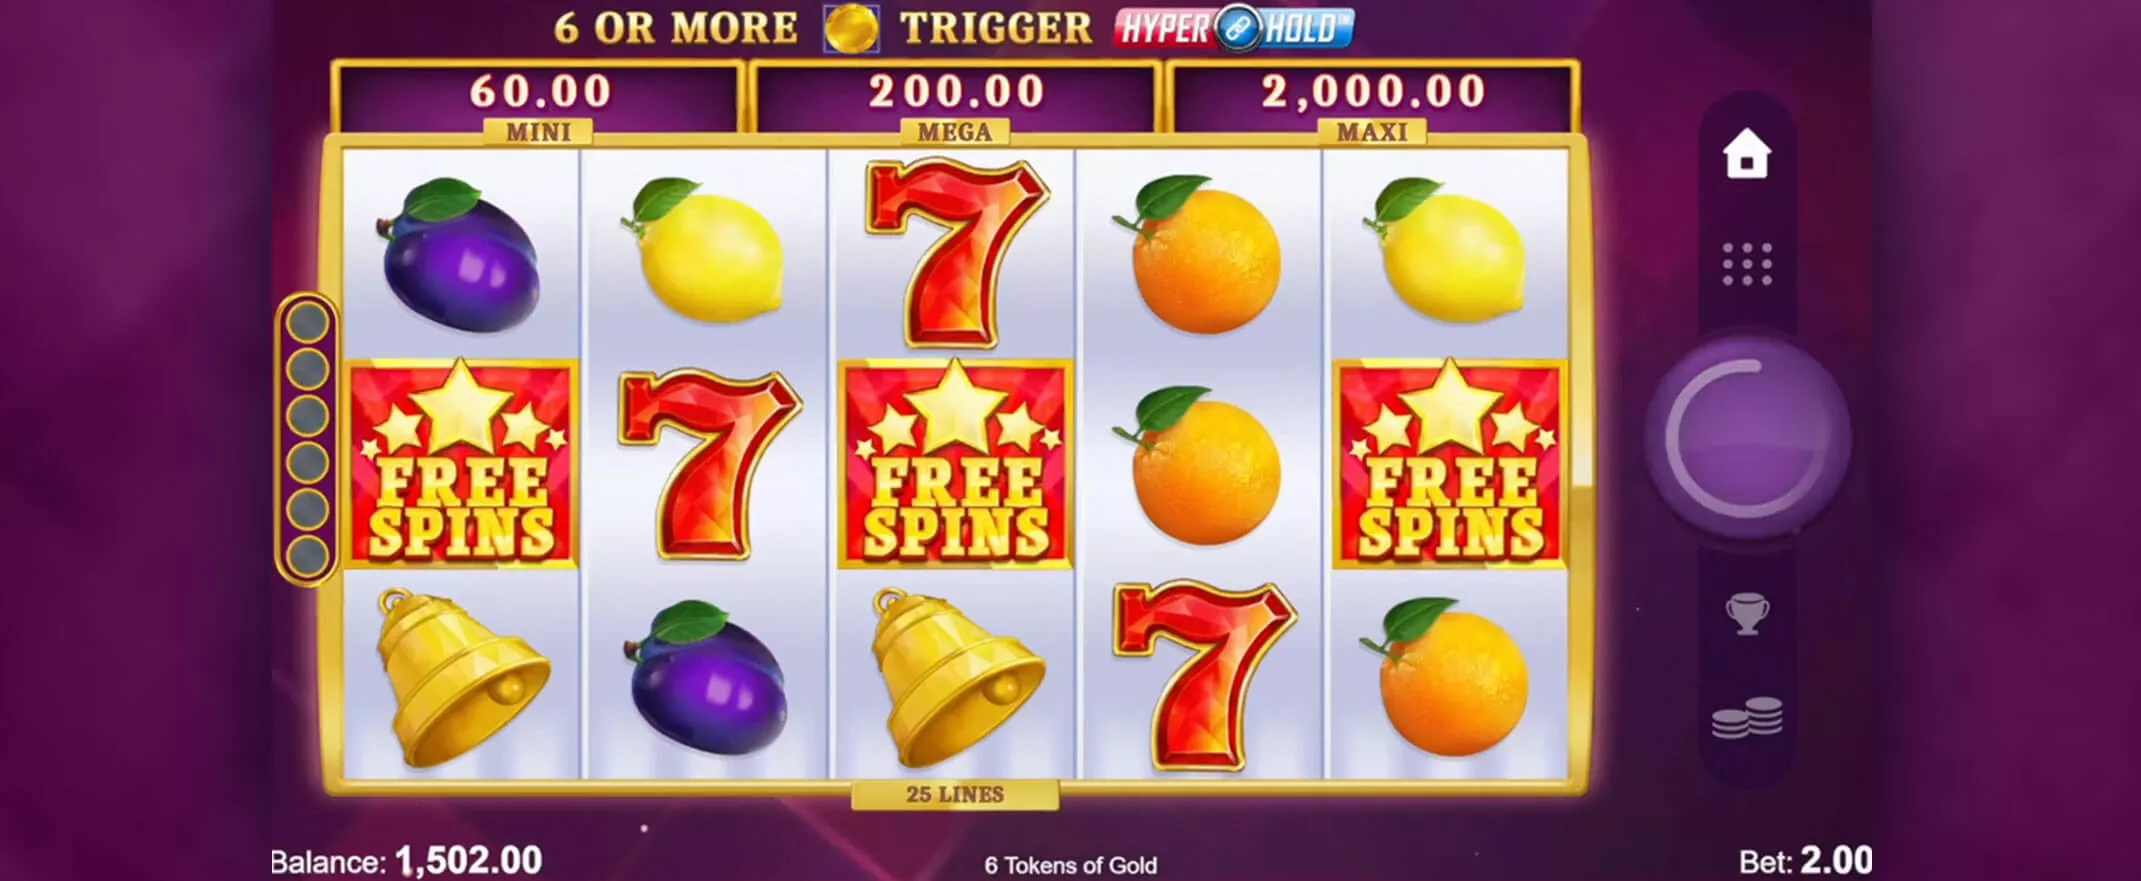 6 Tokens of Gold slot screenshot of the reels